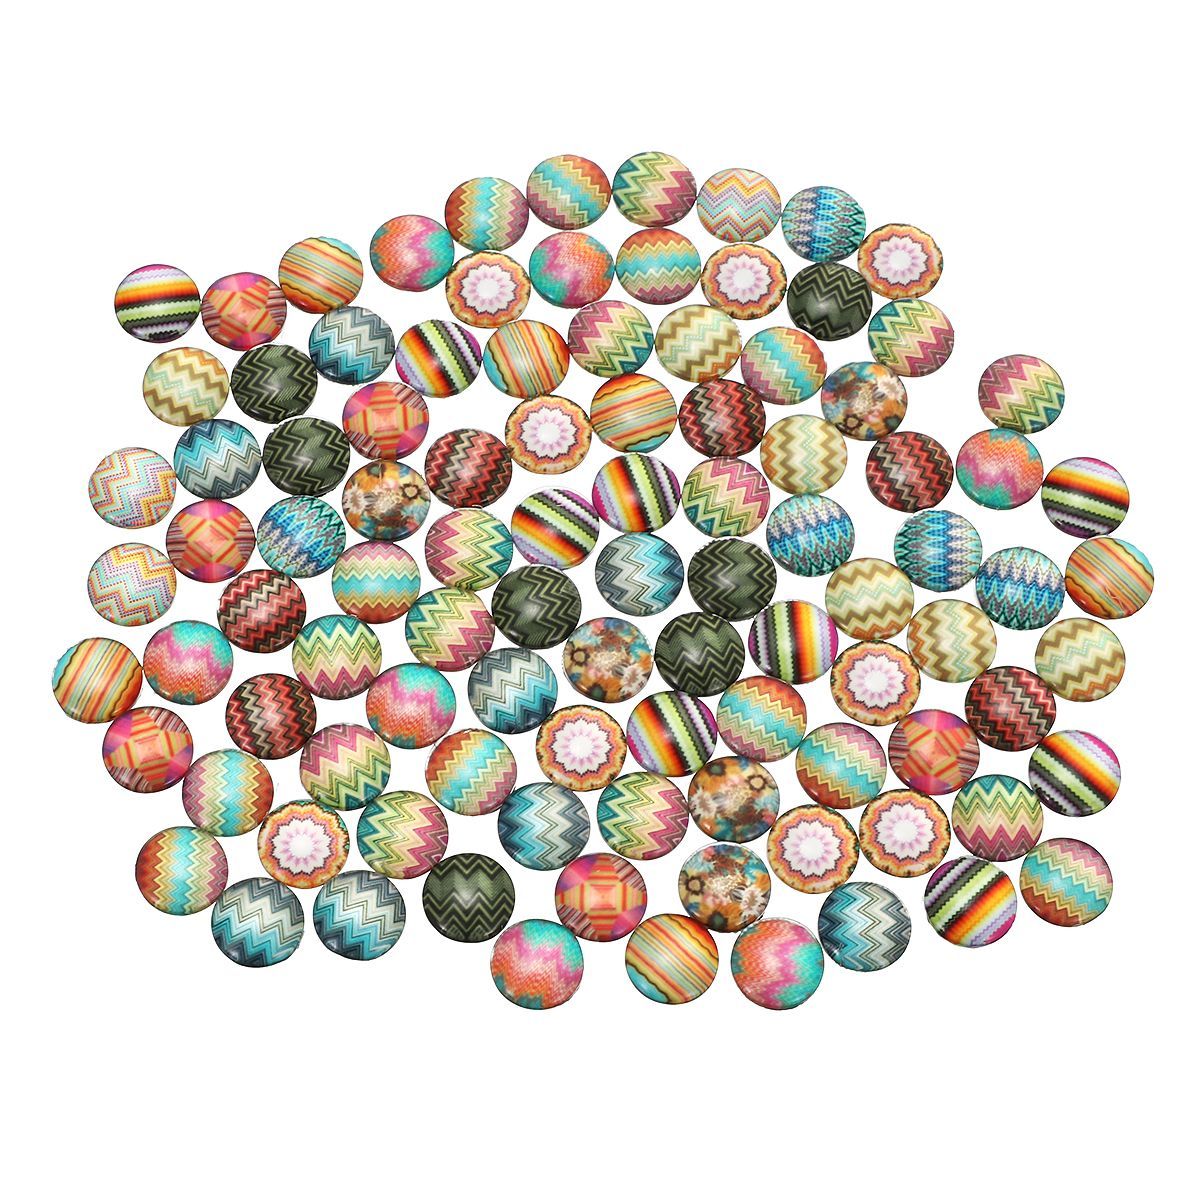 100PcsSet-12MM-Round-Mixed-Supplies-Crafted-Handcrafted-Tiles-For-Jewelry-Making-Decorations-1532872